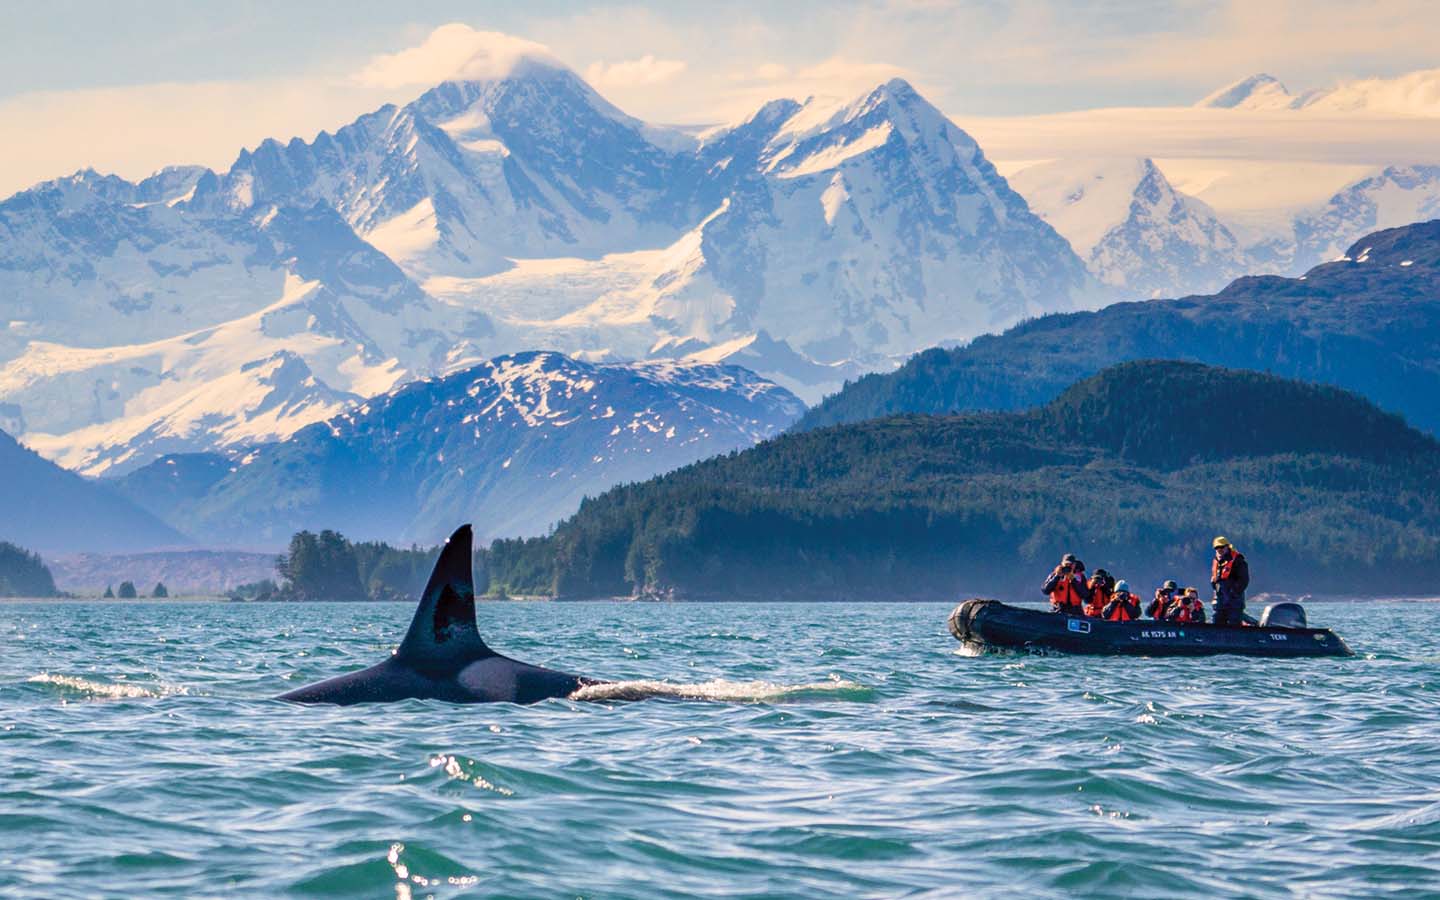 In Alaska, guests photograph the fin of an orca whale as it breaches the water from their inflatable skiff